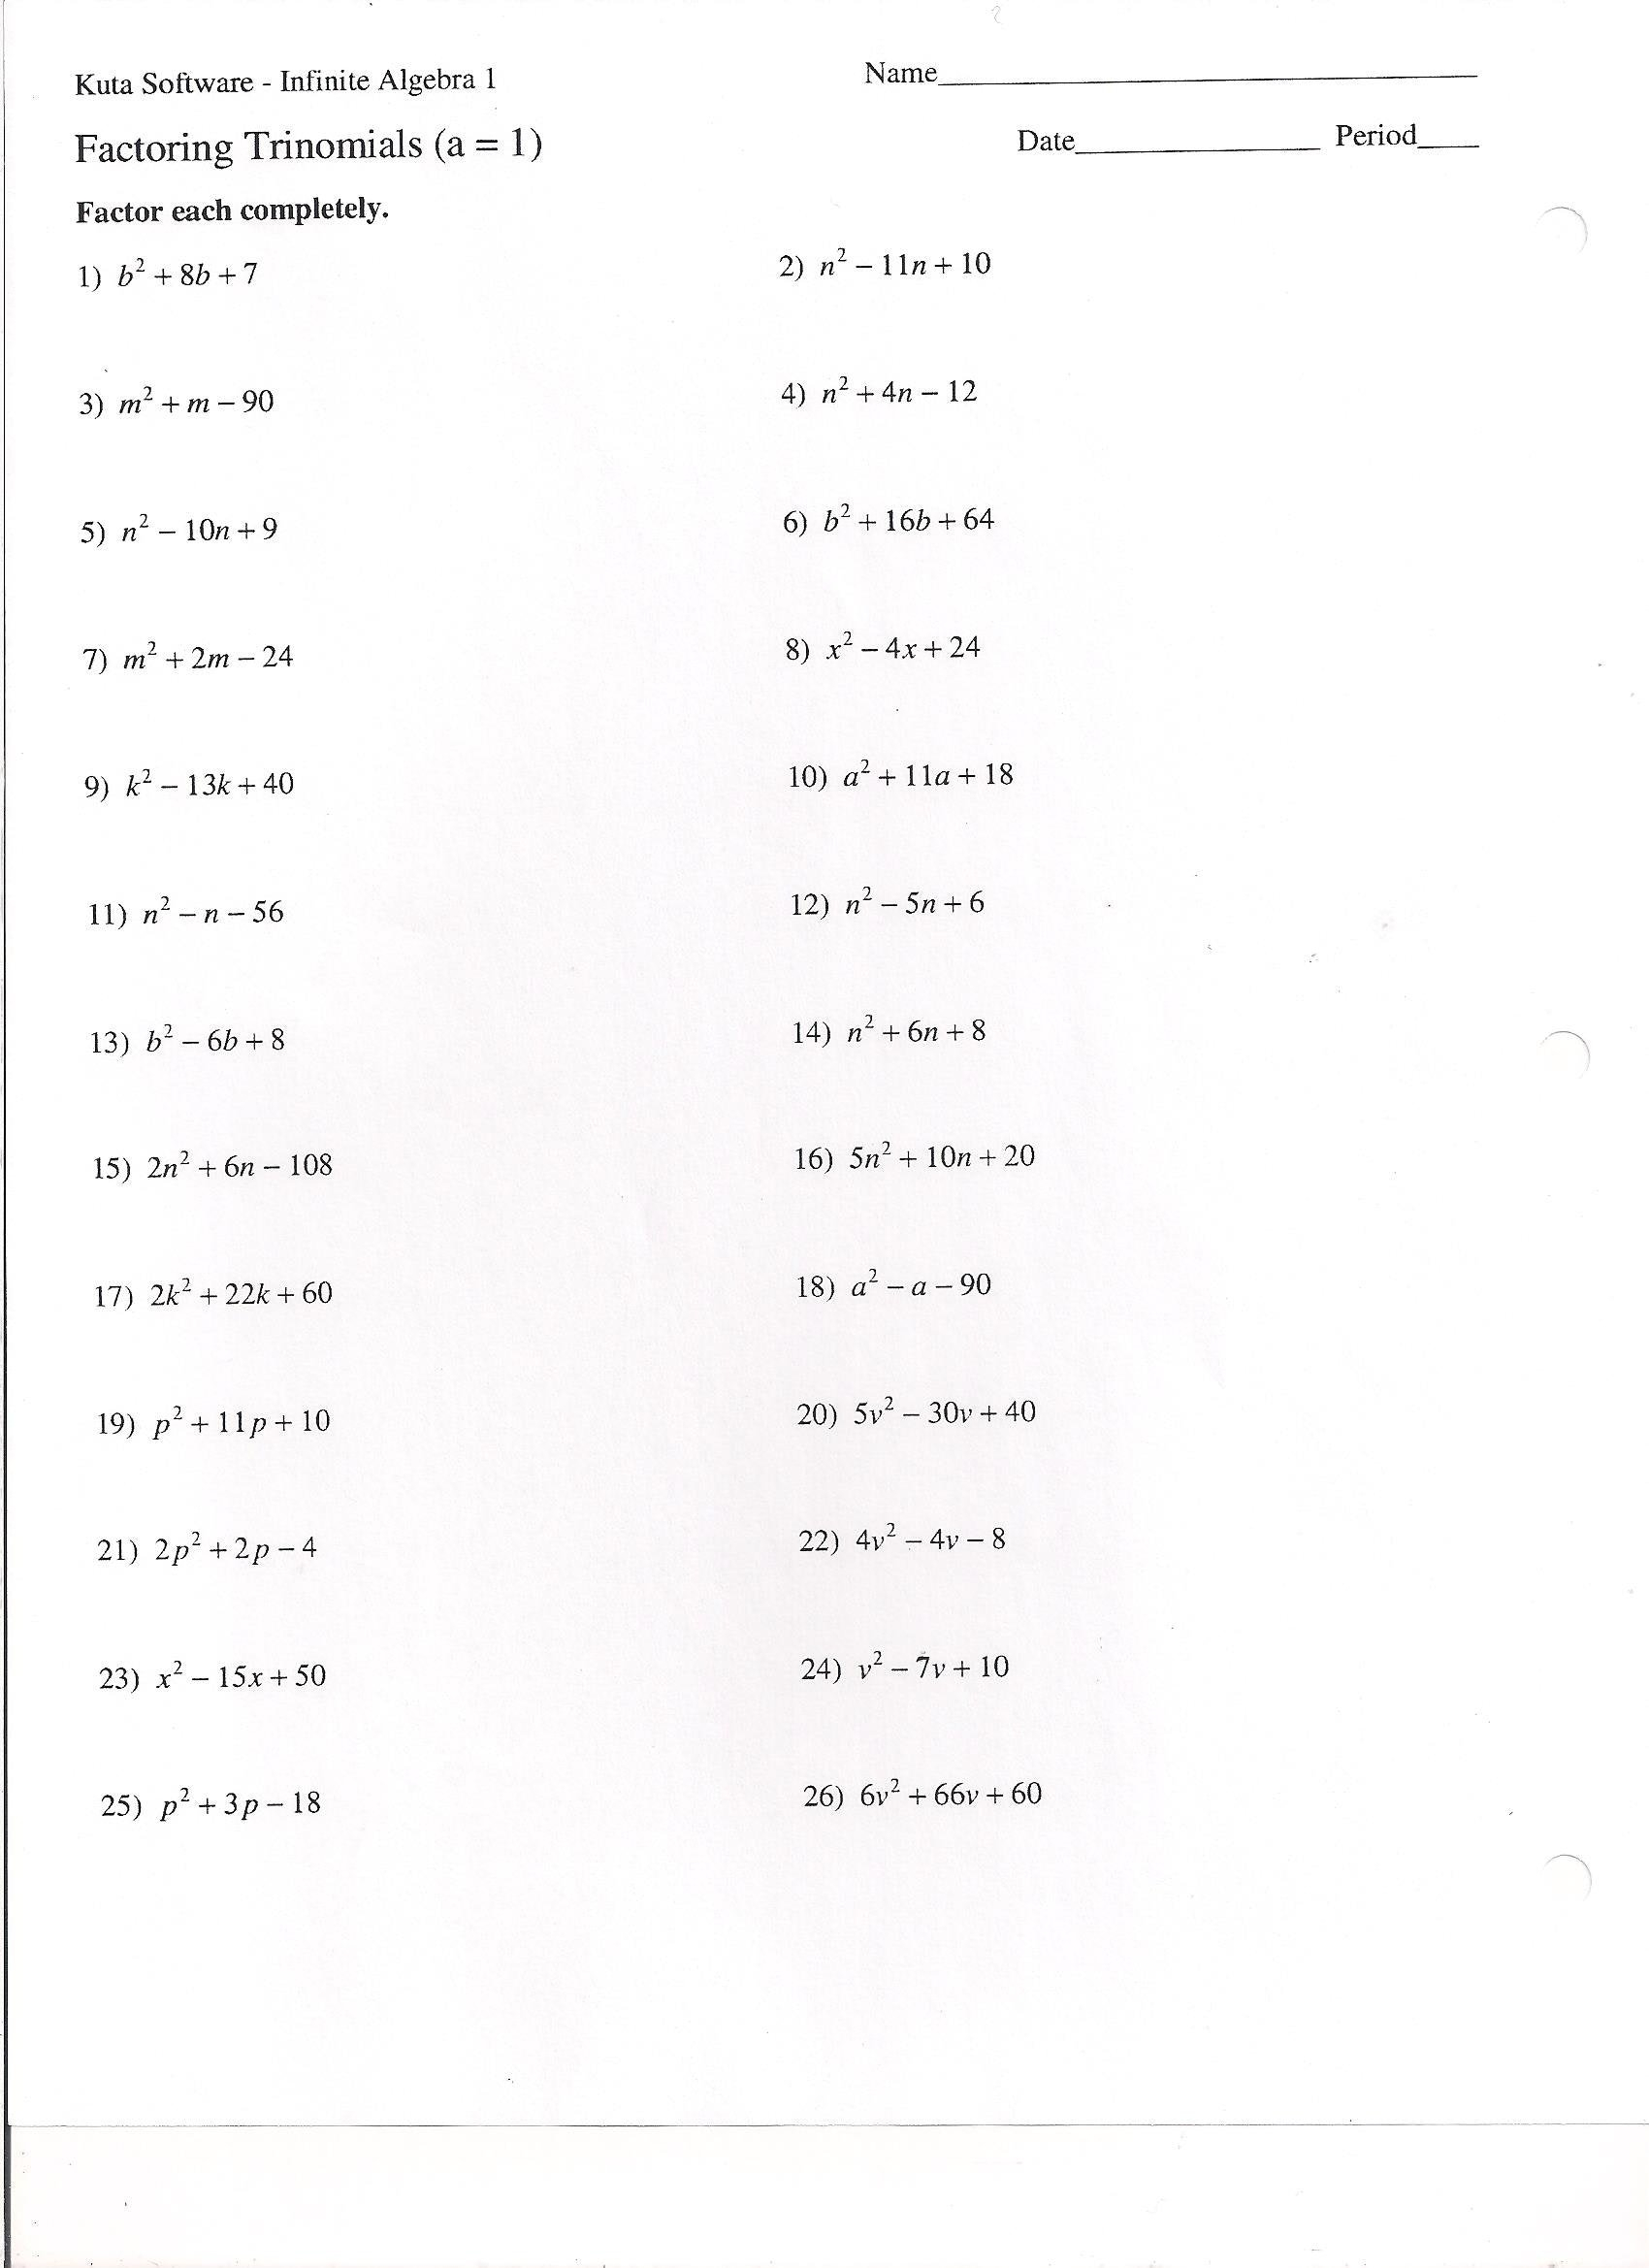 Factoring By Grouping Worksheet Answers